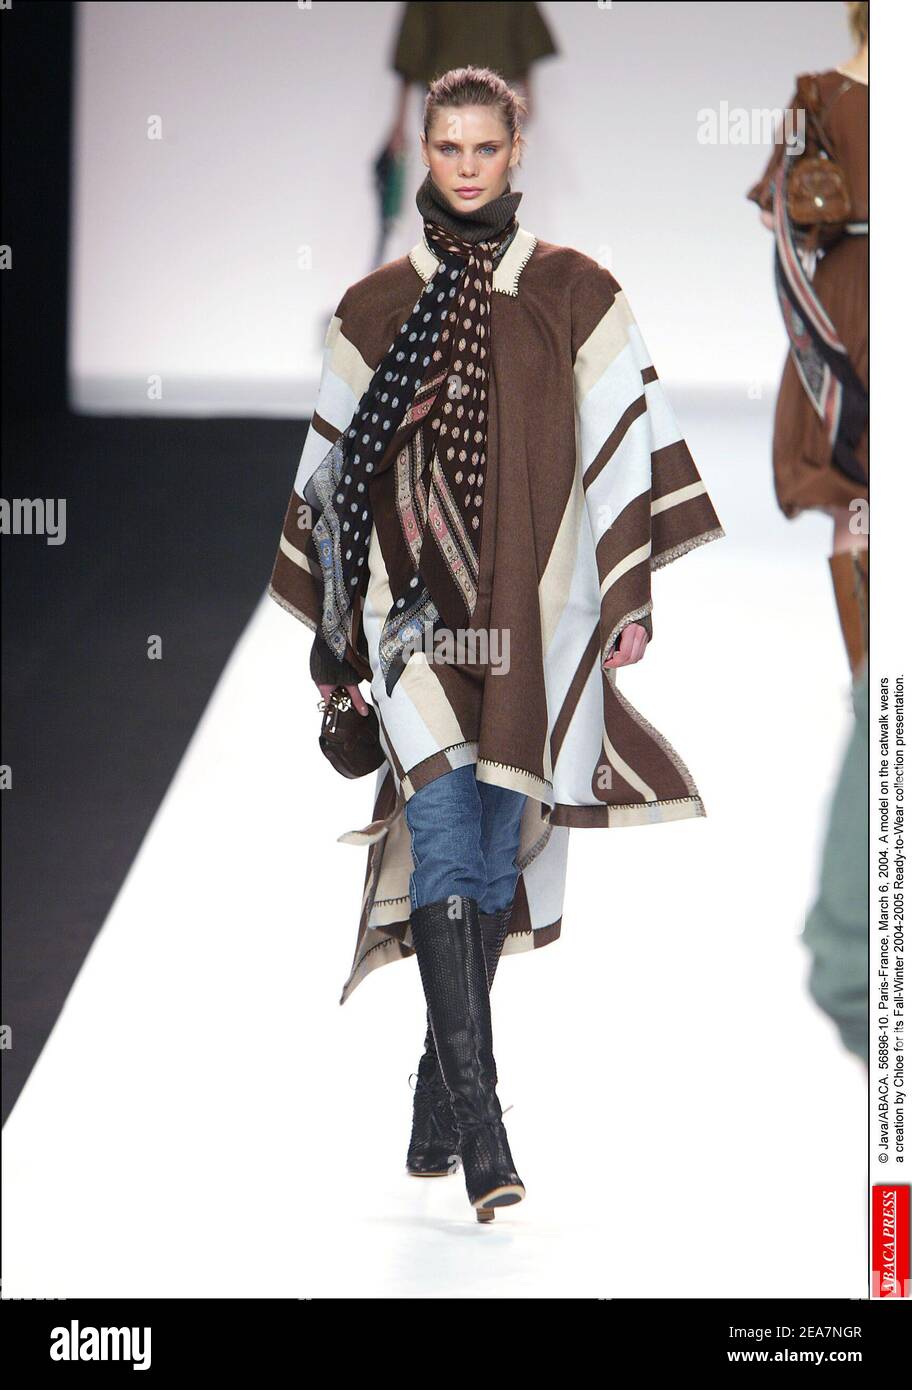 © Java/ABACA. 56896-10. Paris-France, March 6, 2004. A model on the catwalk wears a creation by Chloe for its Fall-Winter 2004-2005 Ready-to-Wear collection presentation. Stock Photo